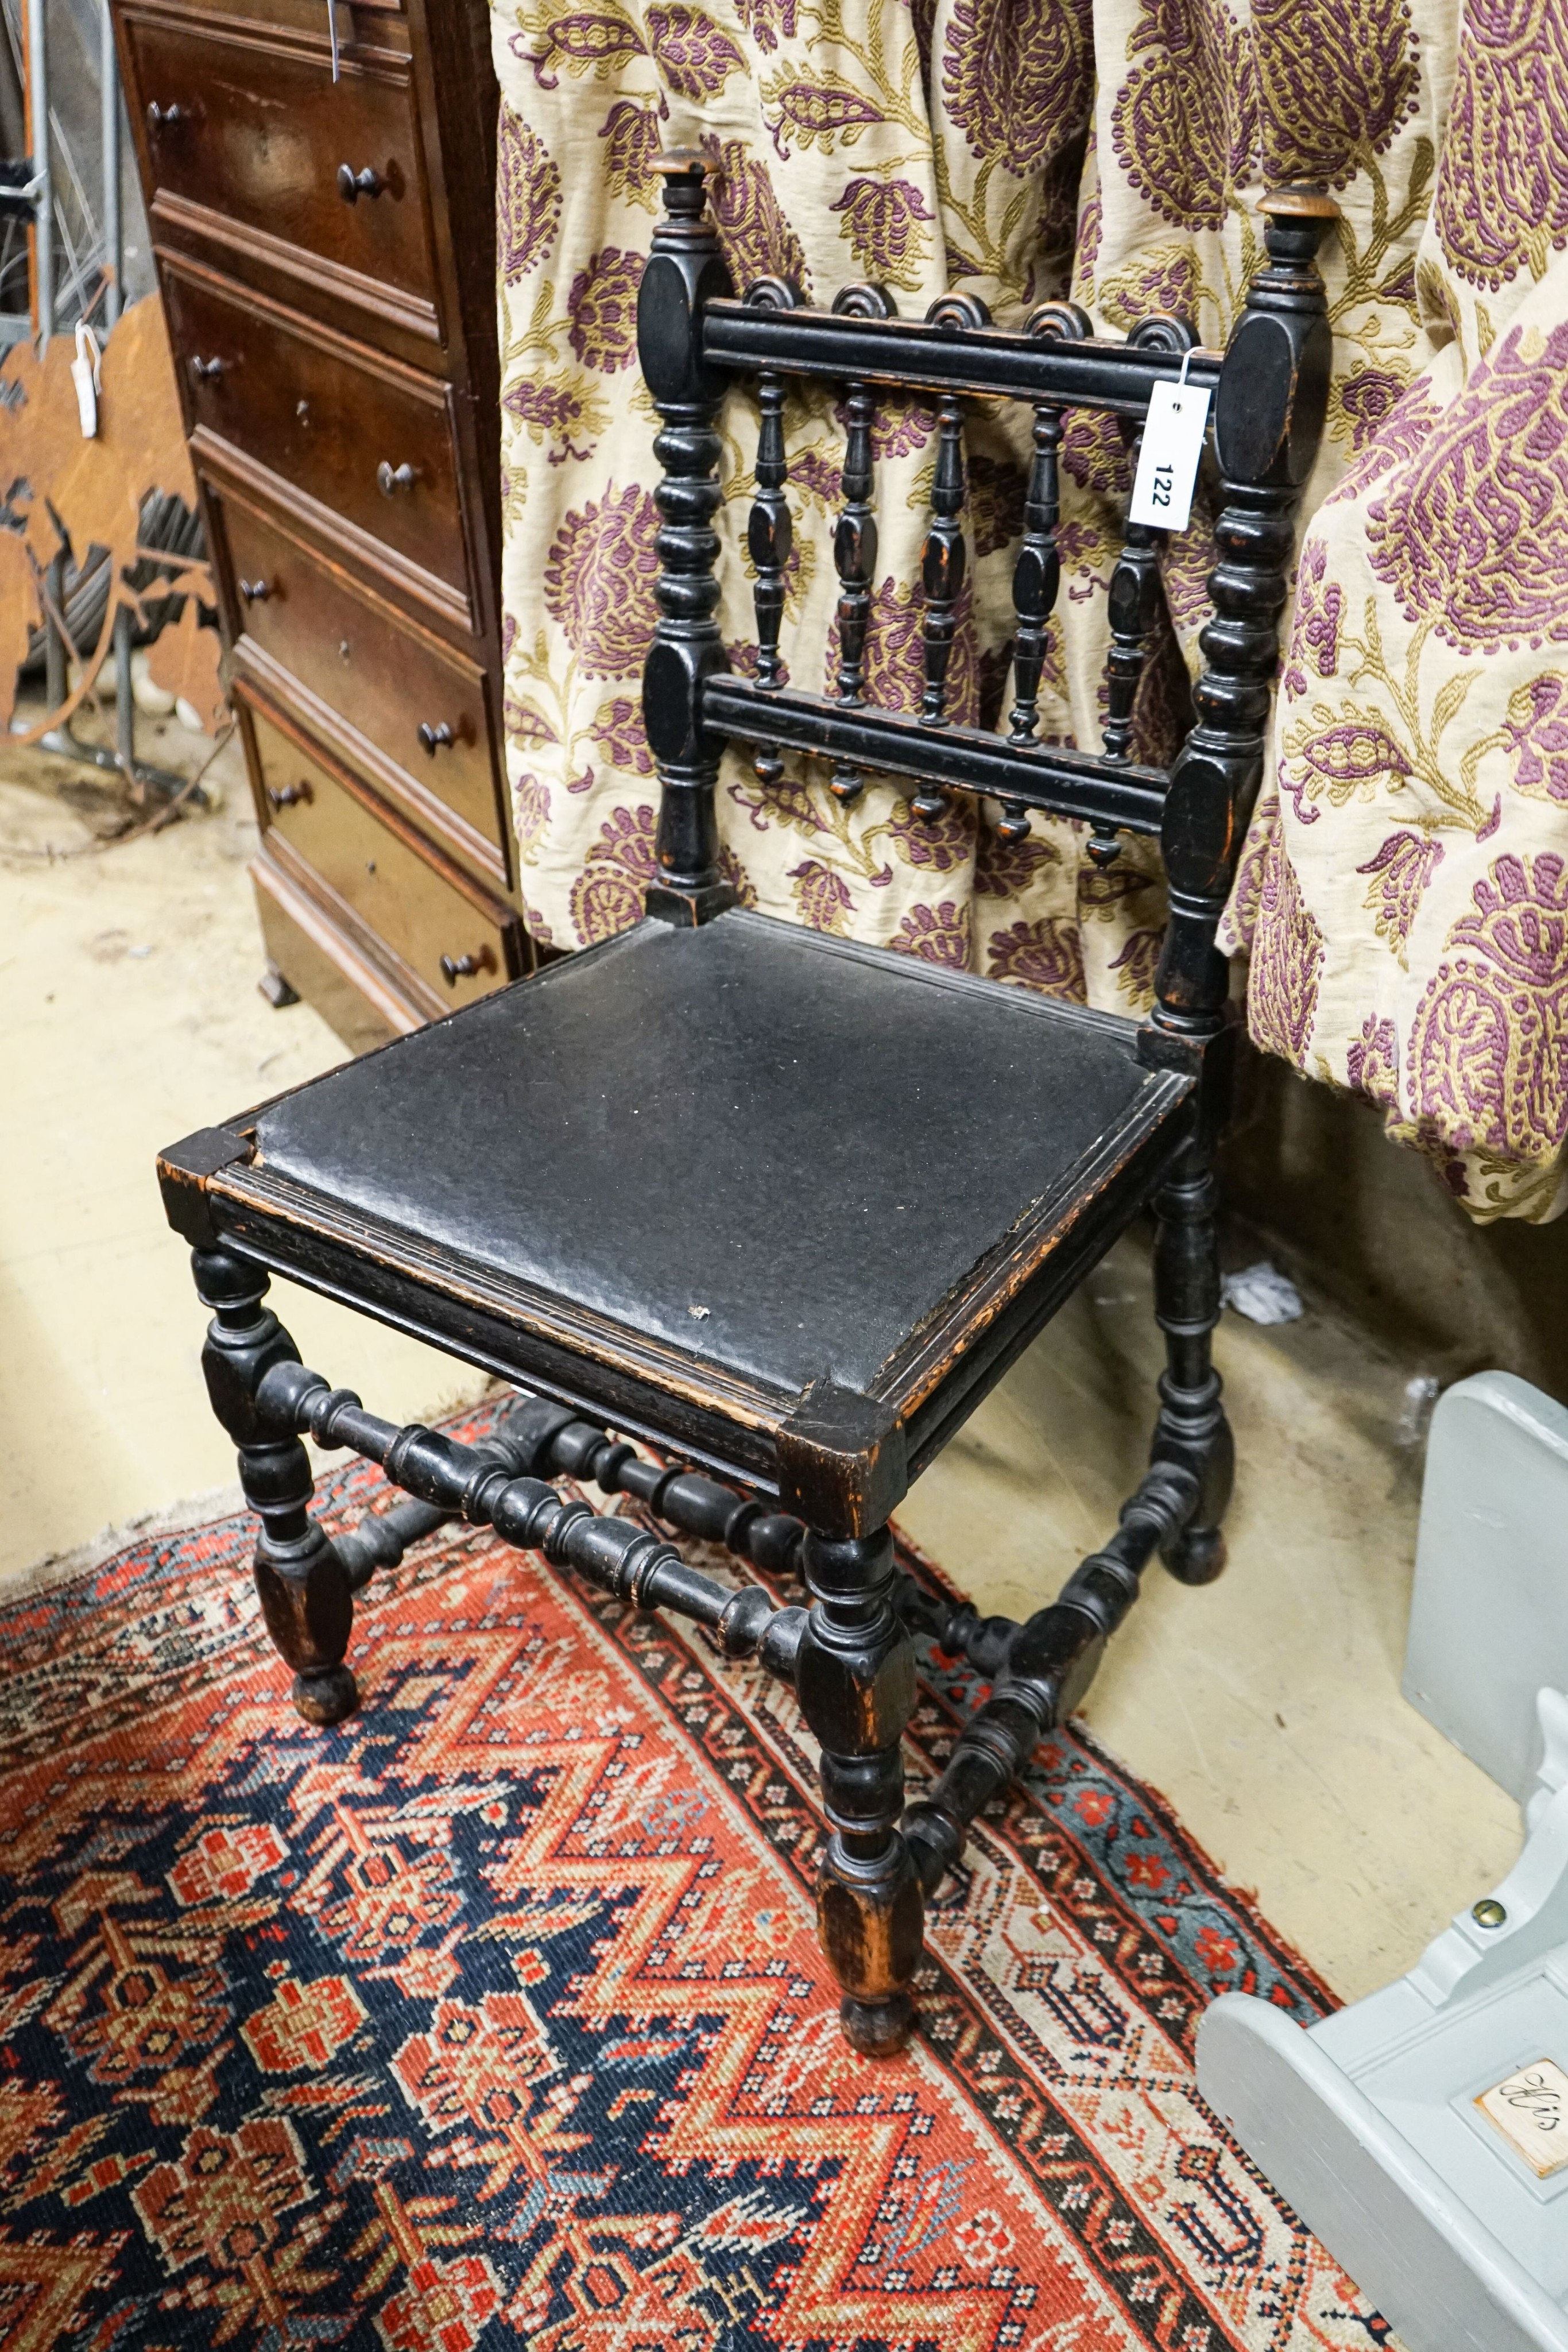 An ebonised beech chair designed by Edward Blore for Lambeth Palace. made by Gillow & Co. original oil cloth seat. Bears an ivorine plaque, 'Lambeth Palace'